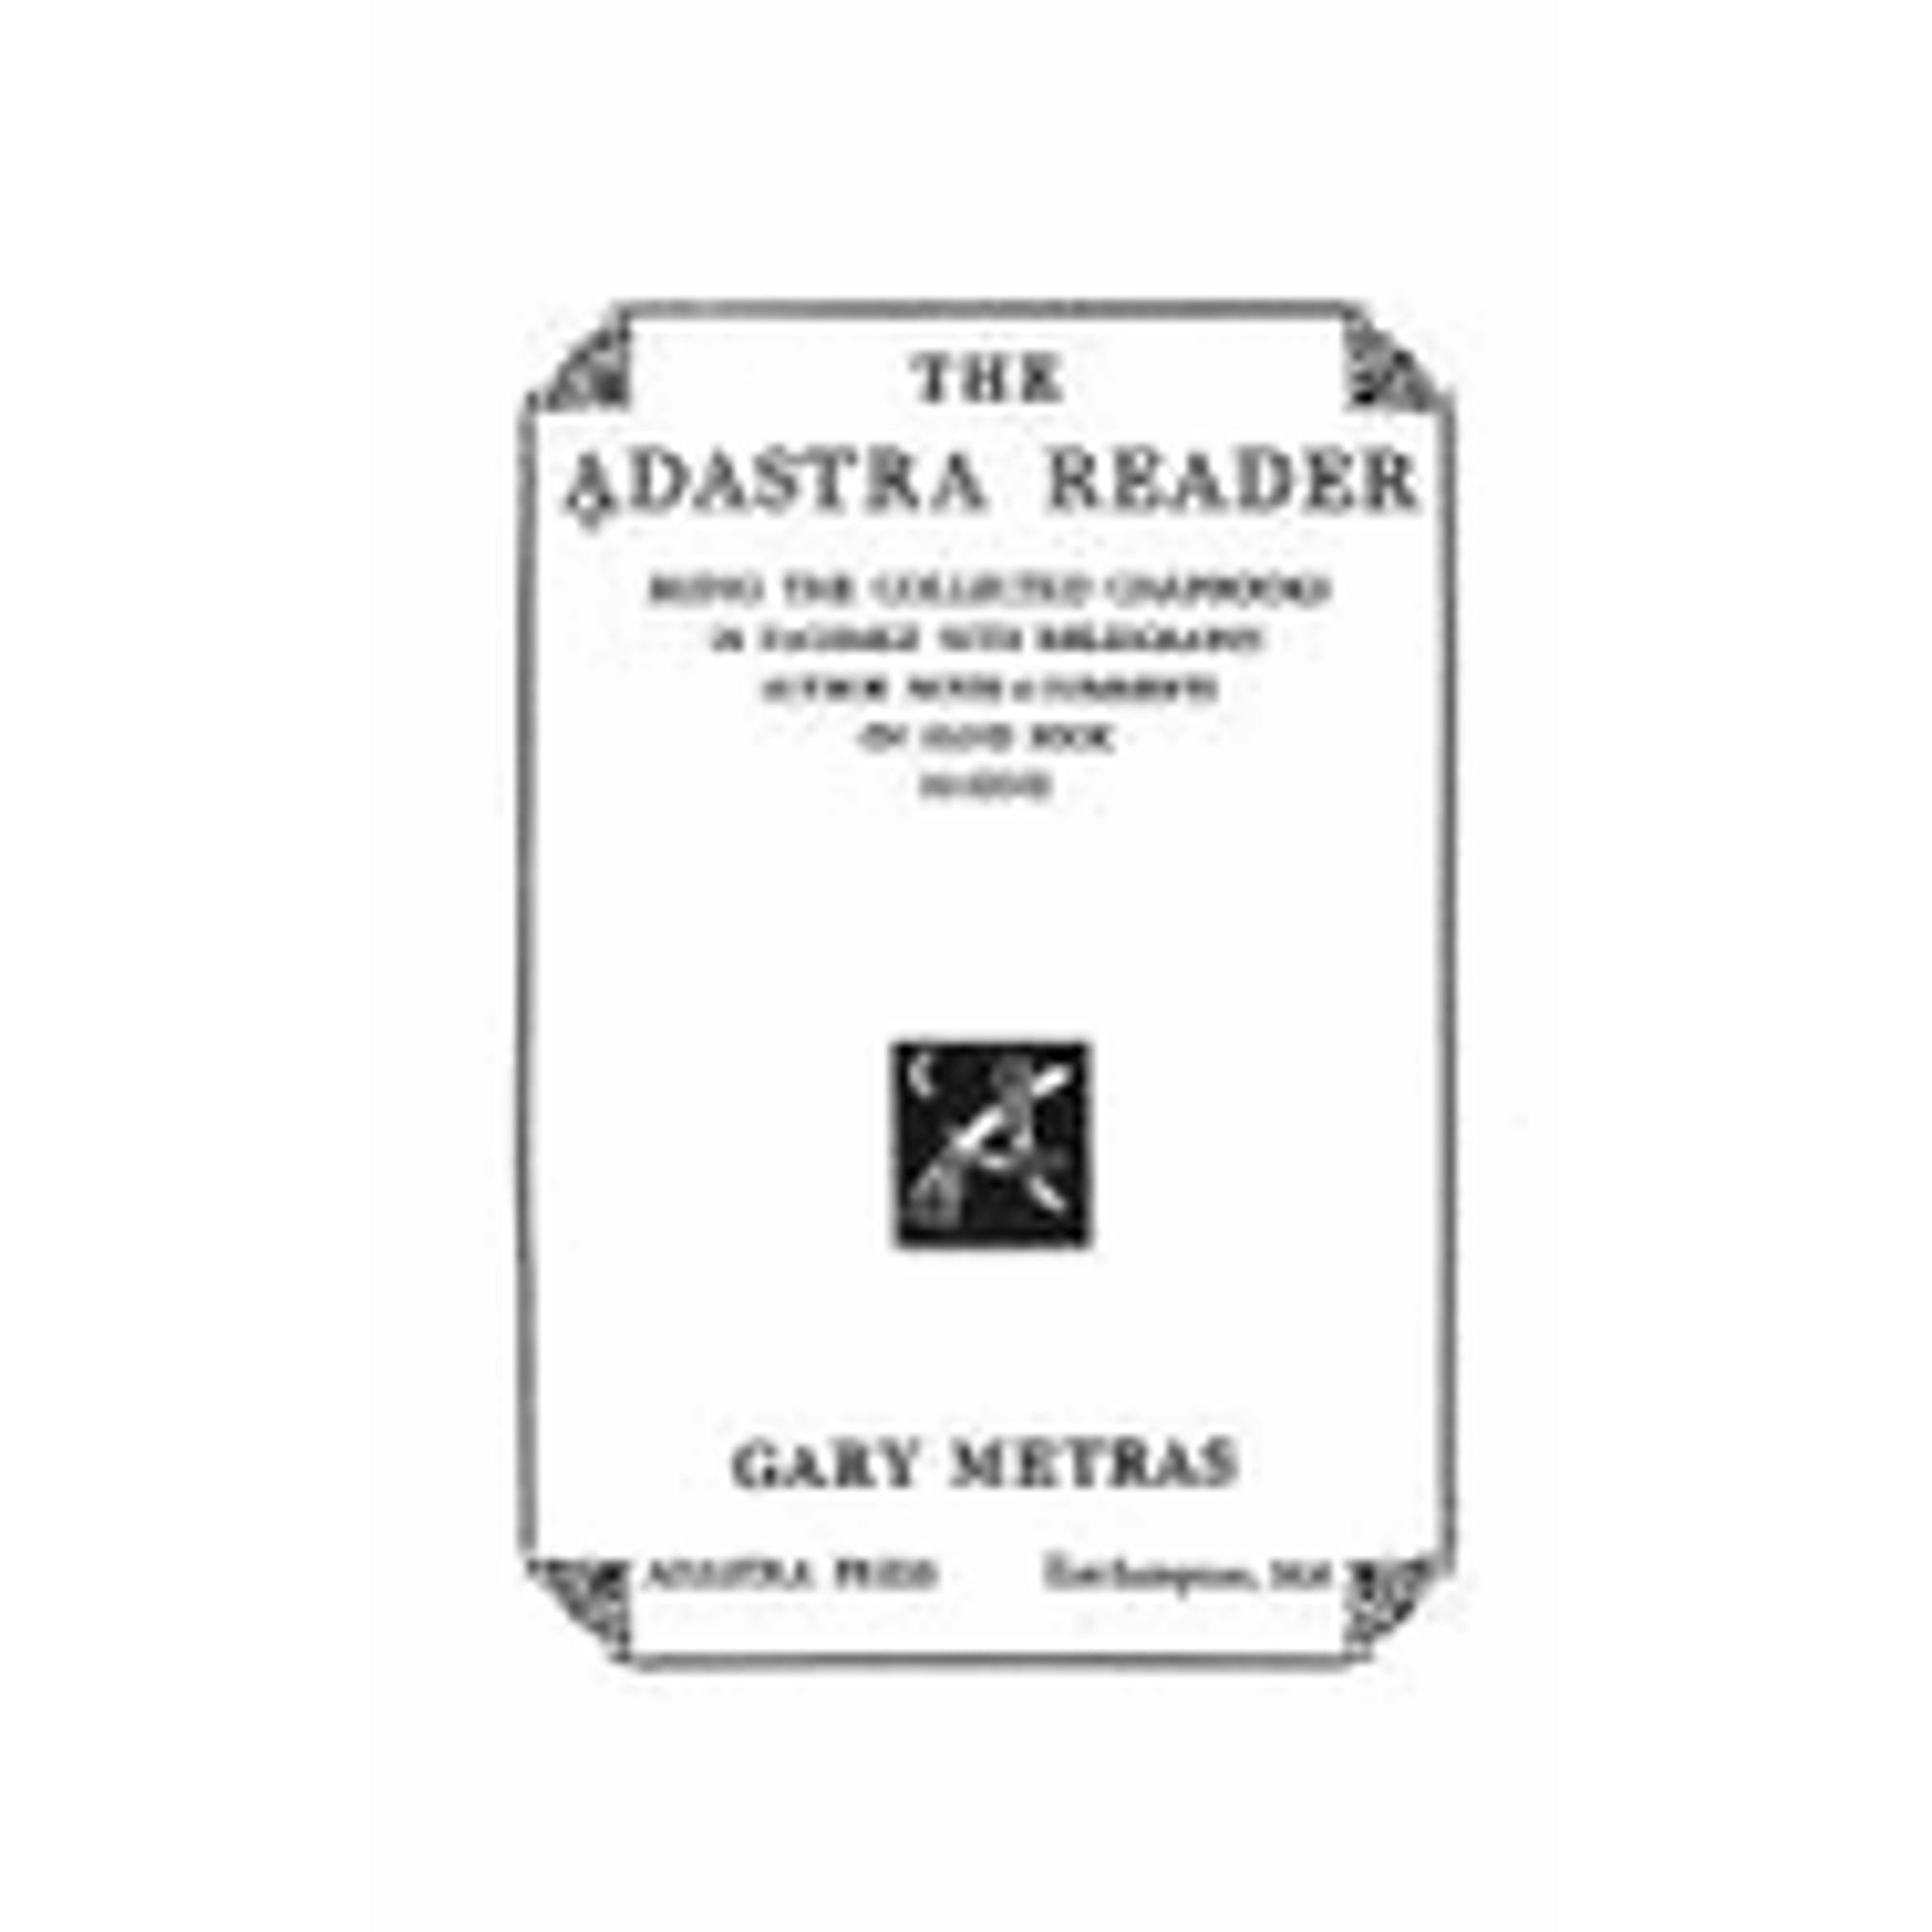 Pre-Owned The Adastra Reader: Being the Collected Chapbooks in Facsimile with Bibliography, Author (Paperback 9780938566328) by Gary Metras